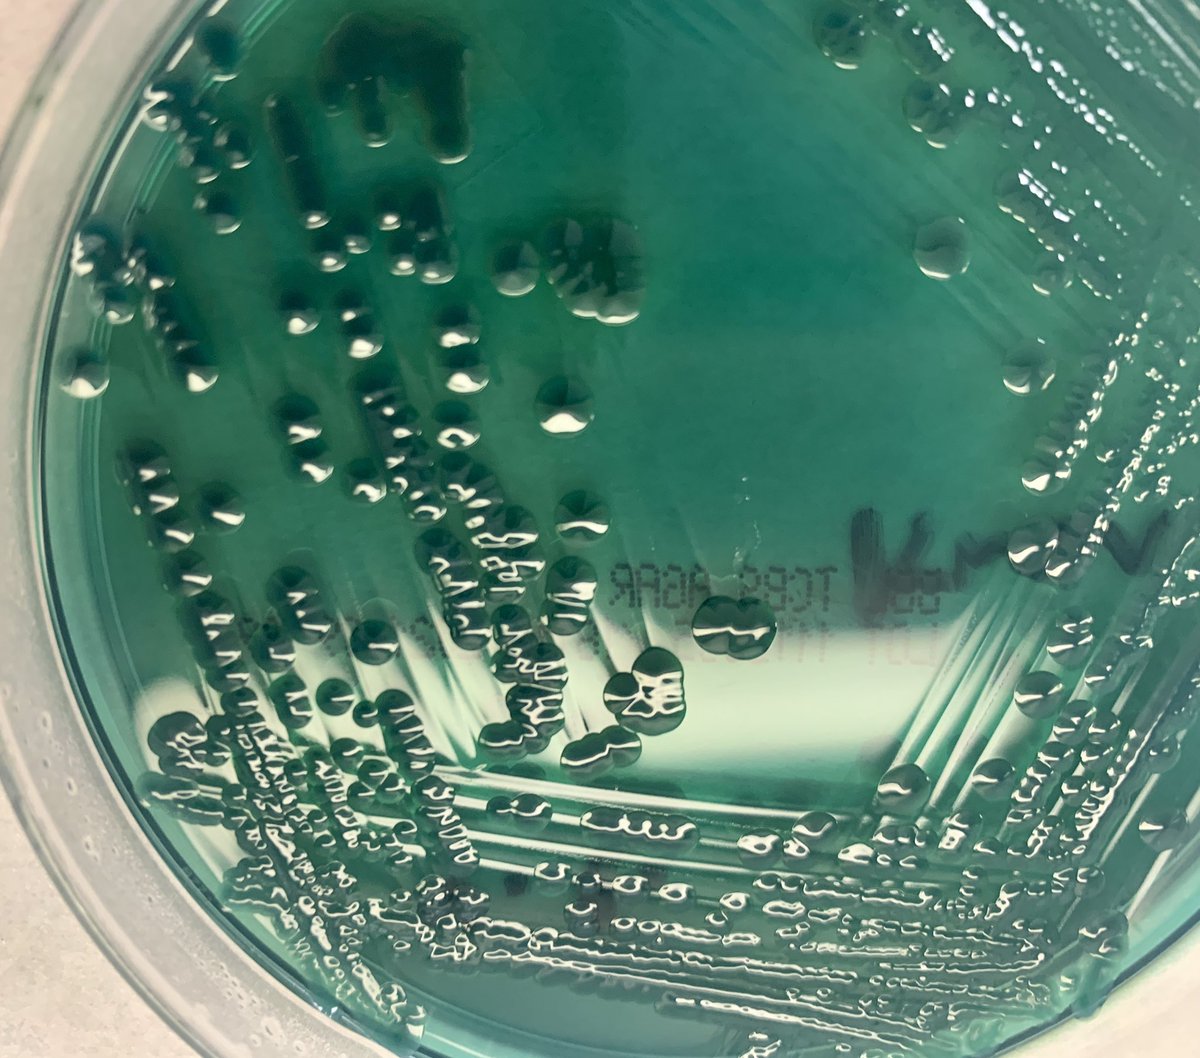 TCBS agar growth close up: Does not utilize sucrose, produces blue-green colonies. Vibrio cholera will be yellow in agar